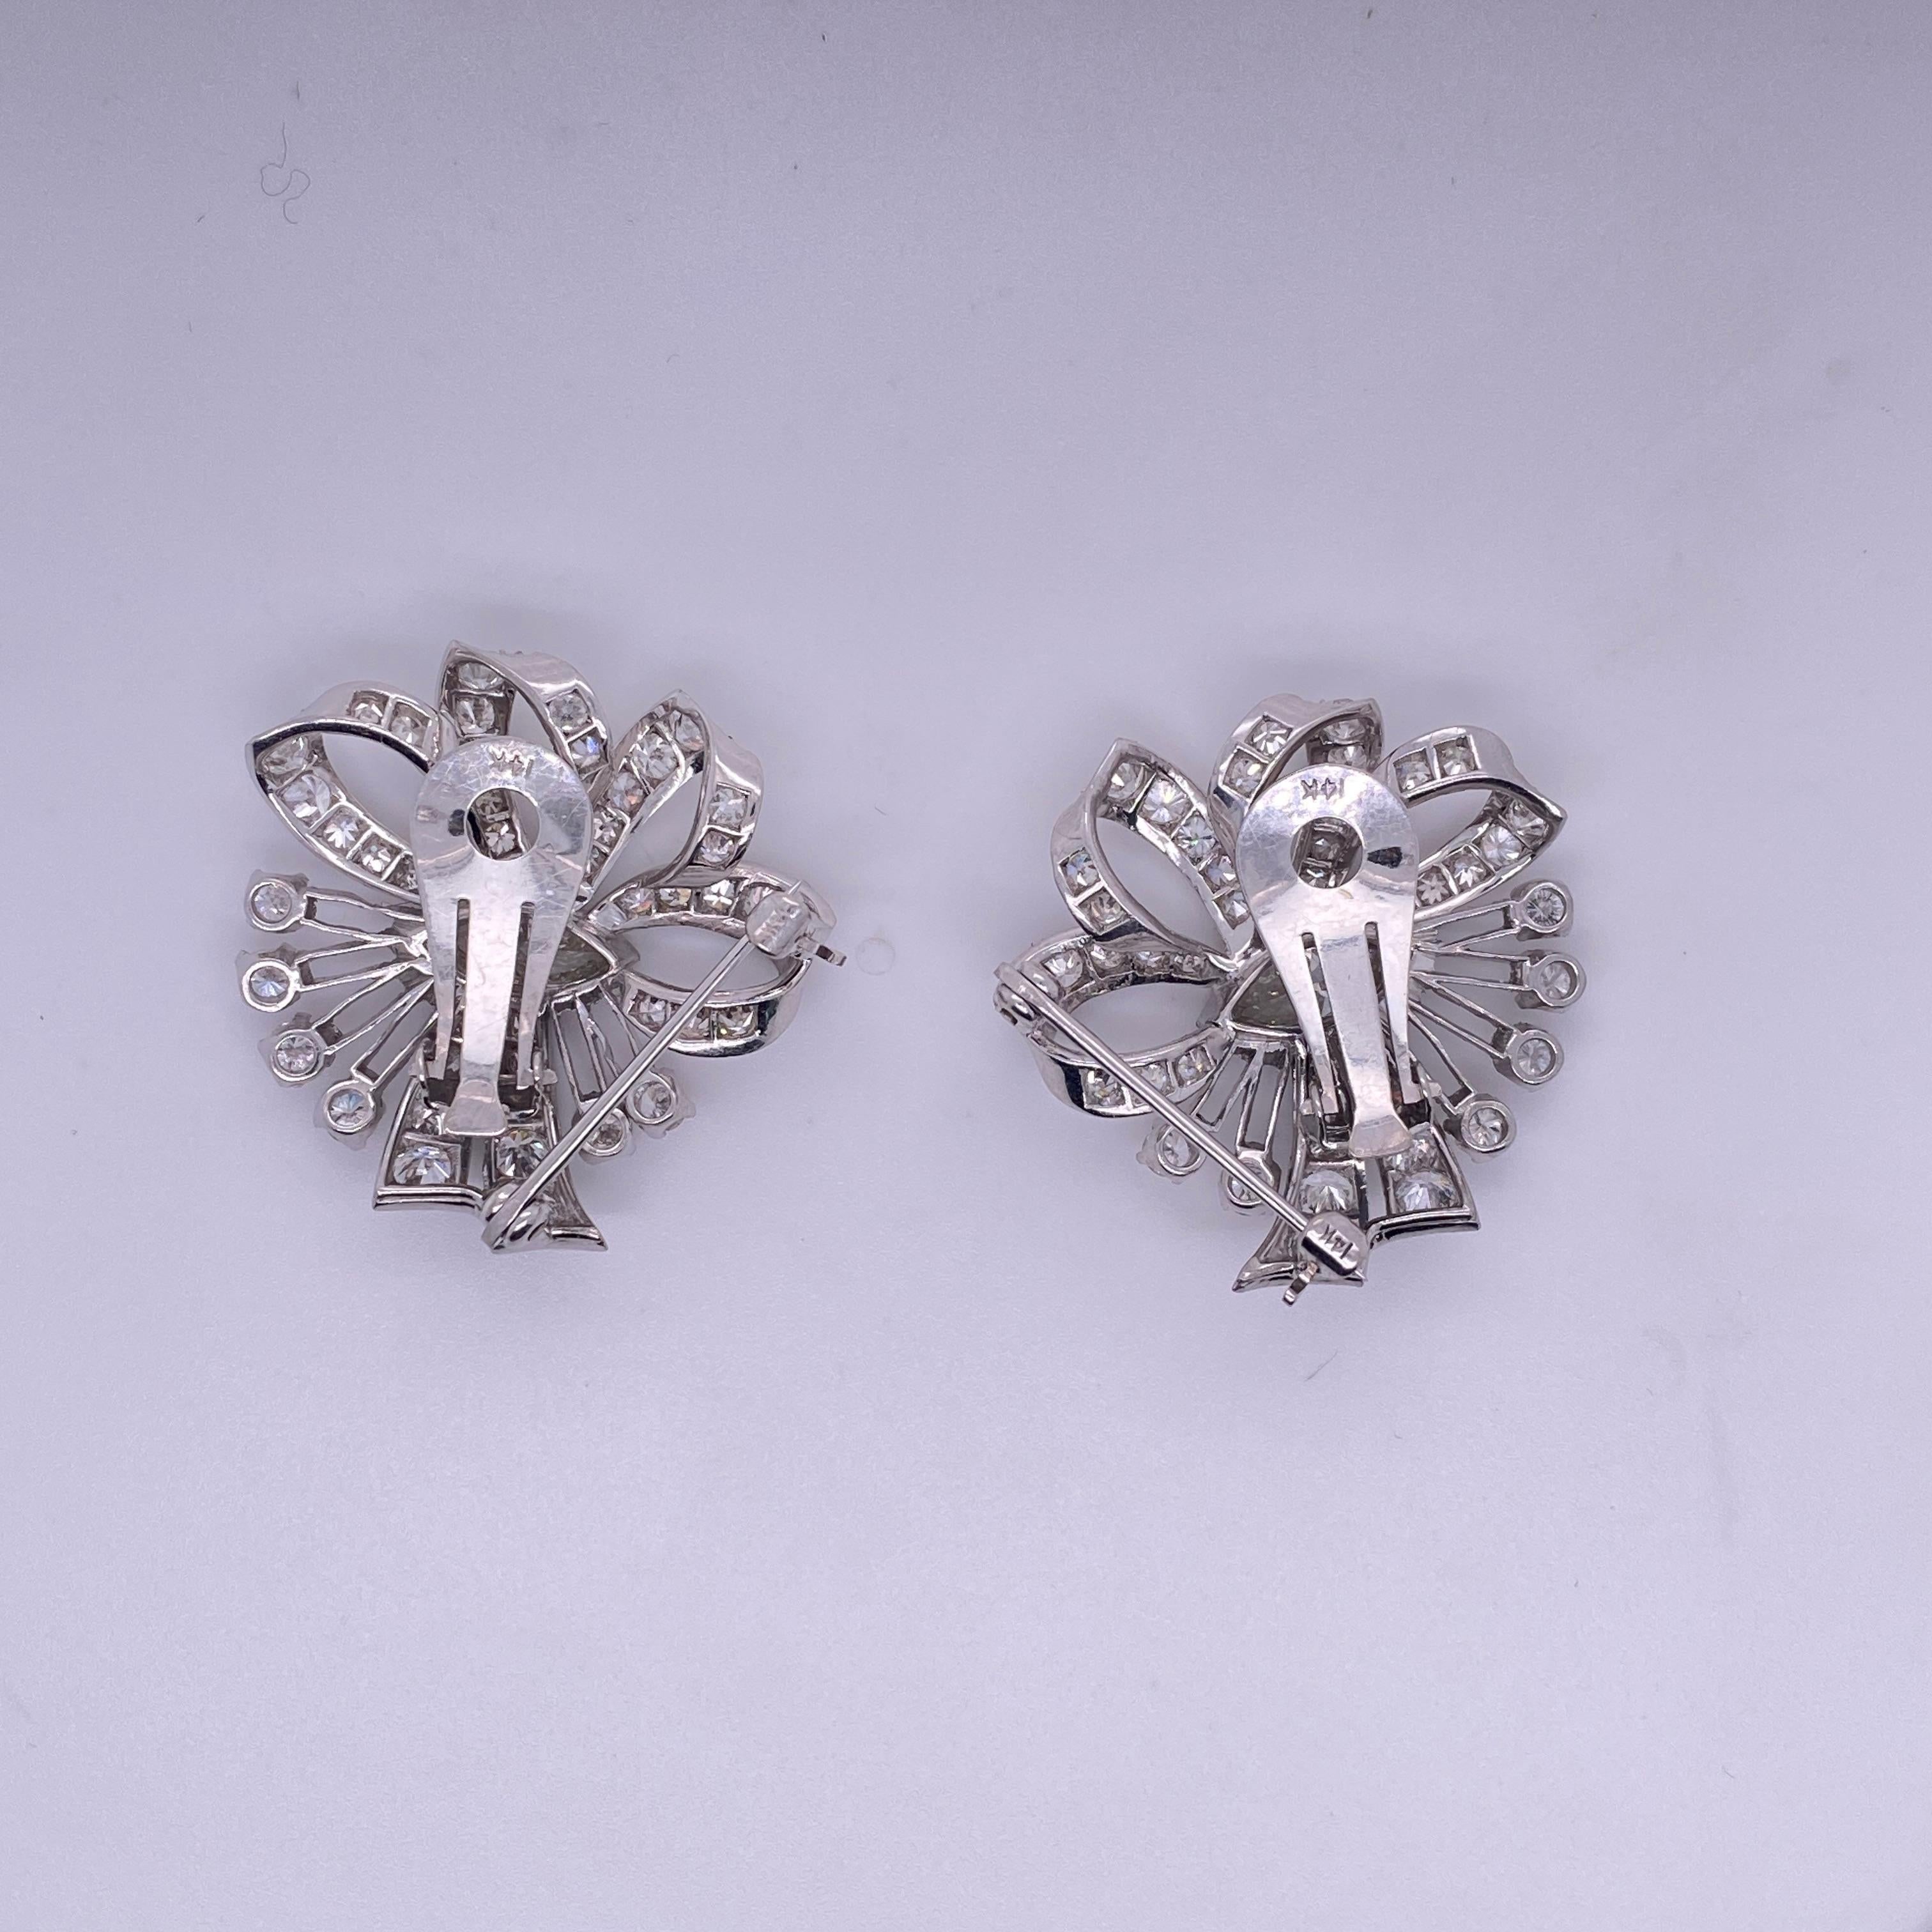 Edwardian, Cluster, Diamond Clip-On Earrings with Pin-Backs 1